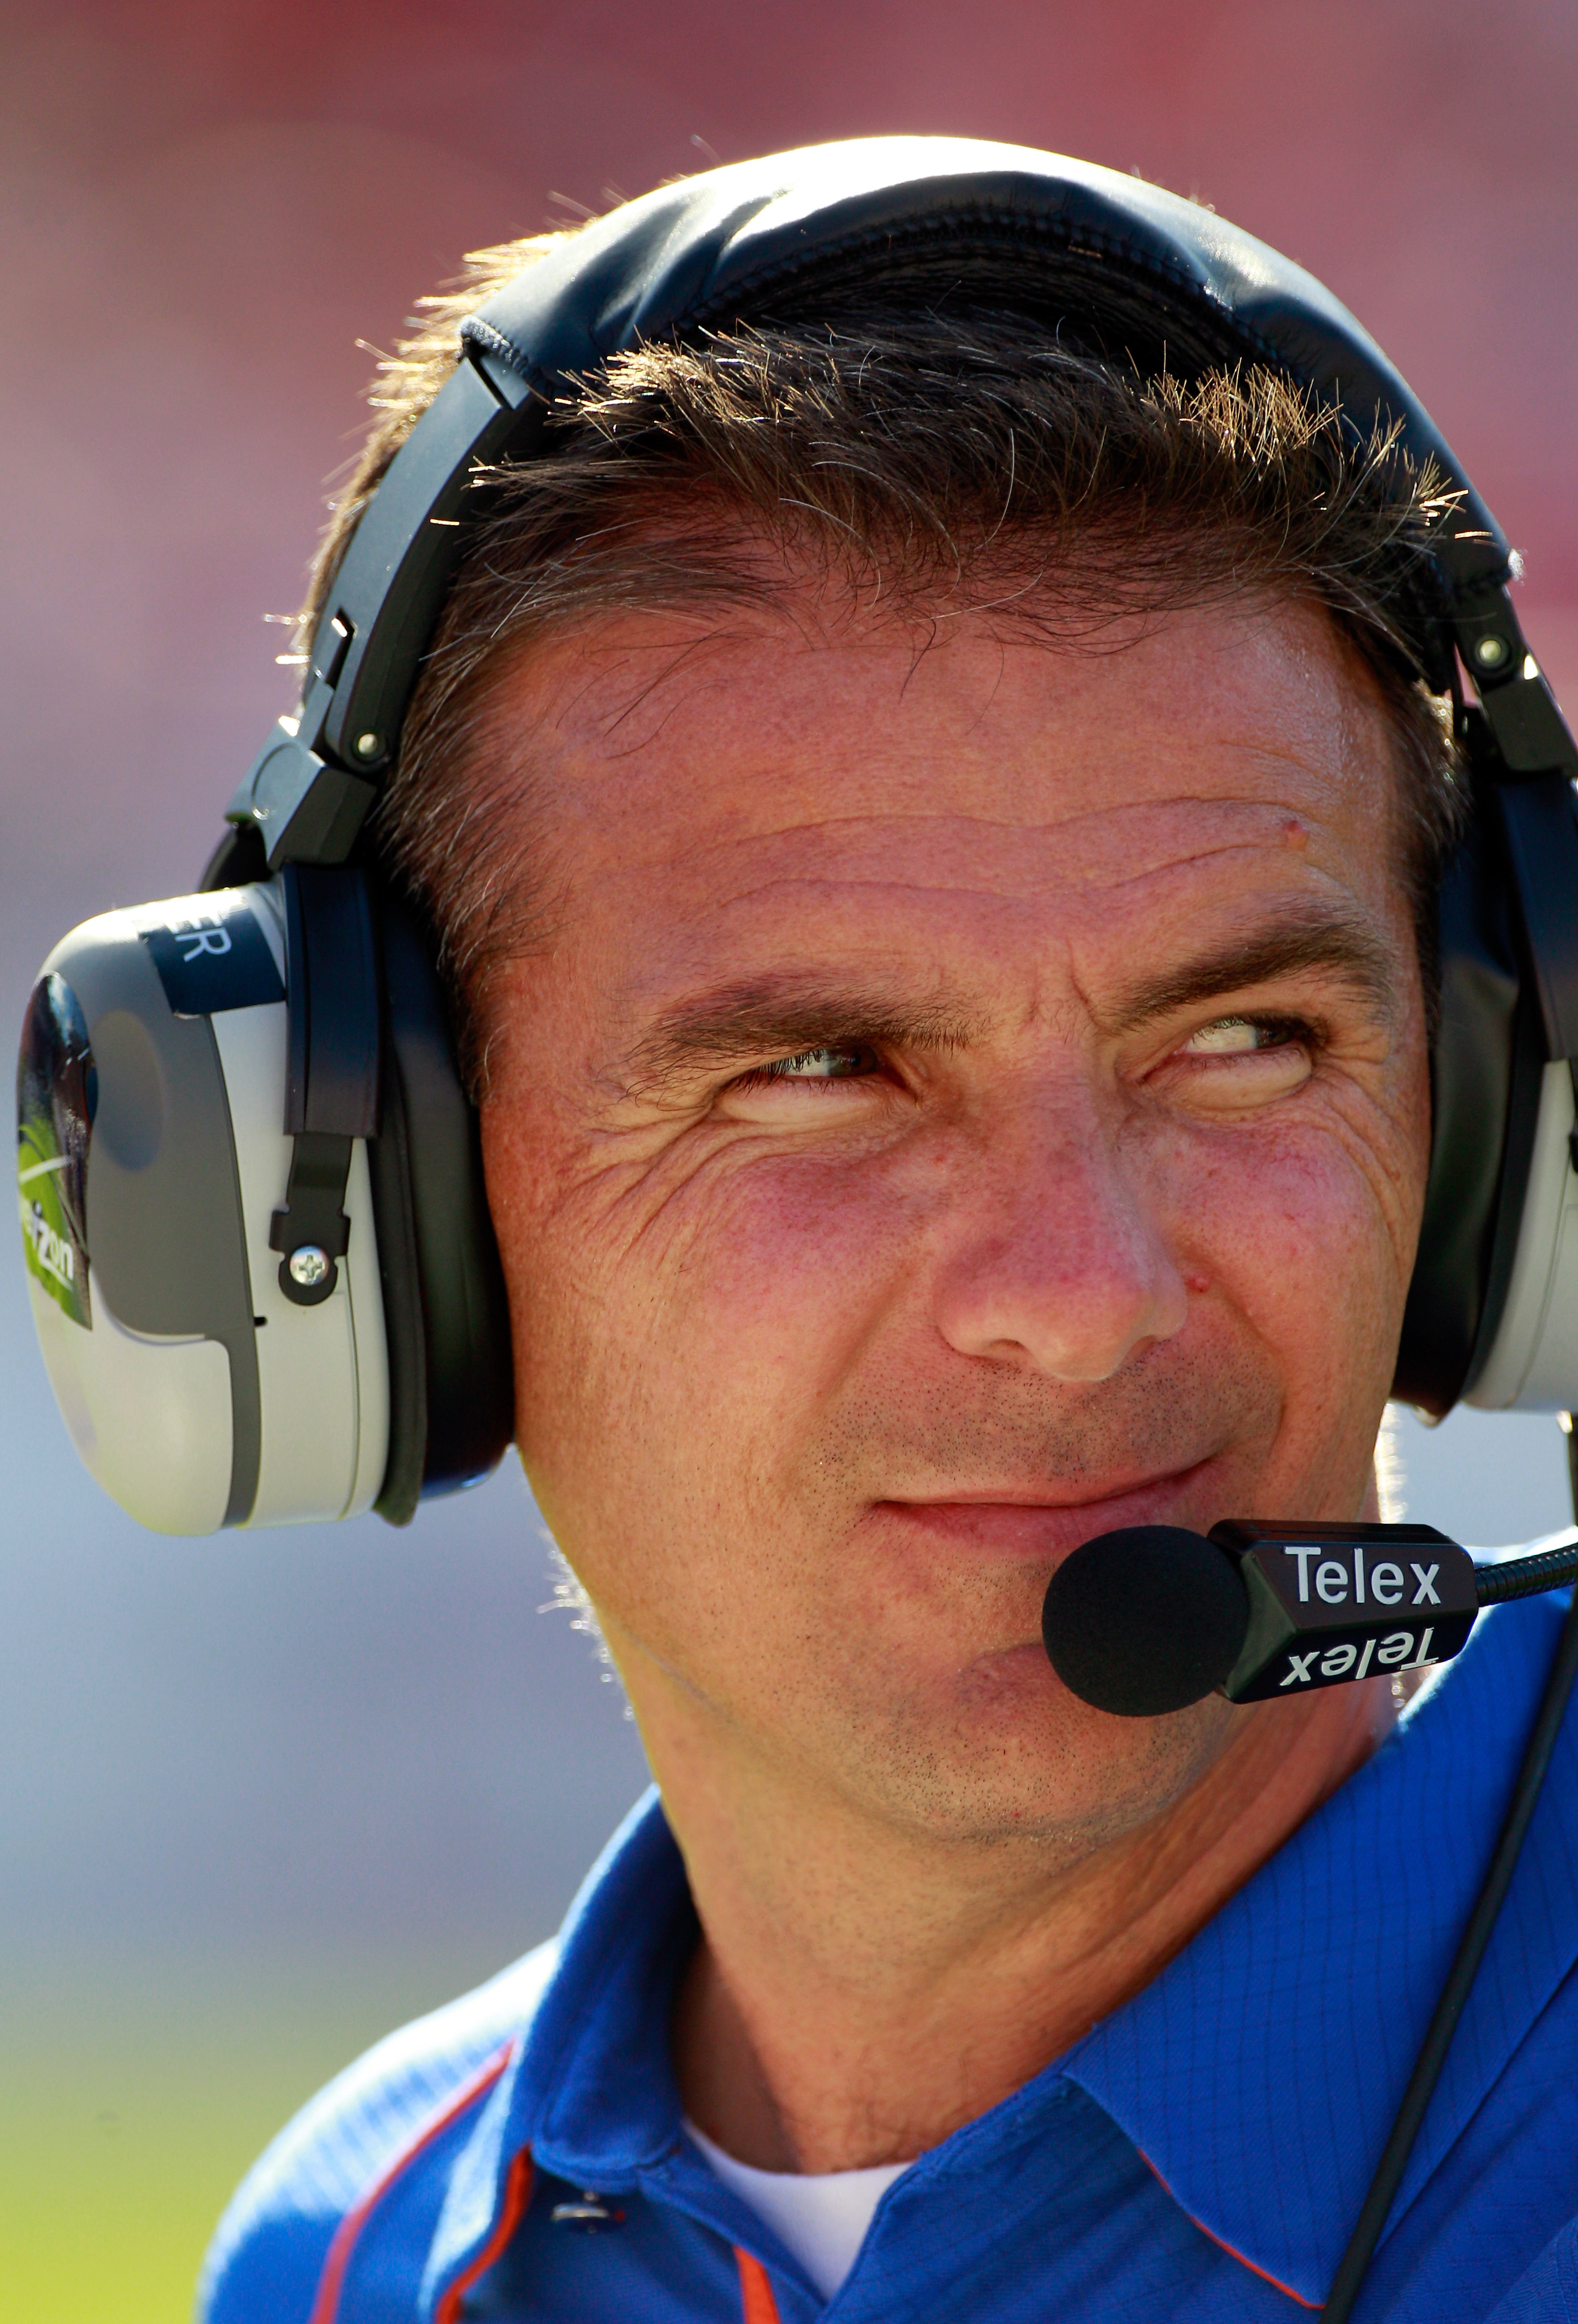 JACKSONVILLE, FL - OCTOBER 30:  Head coach Urban Meyer of the Florida Gators watches the action during the game against the Georgia Bulldogs at EverBank Field on October 30, 2010 in Jacksonville, Florida.  (Photo by Sam Greenwood/Getty Images)